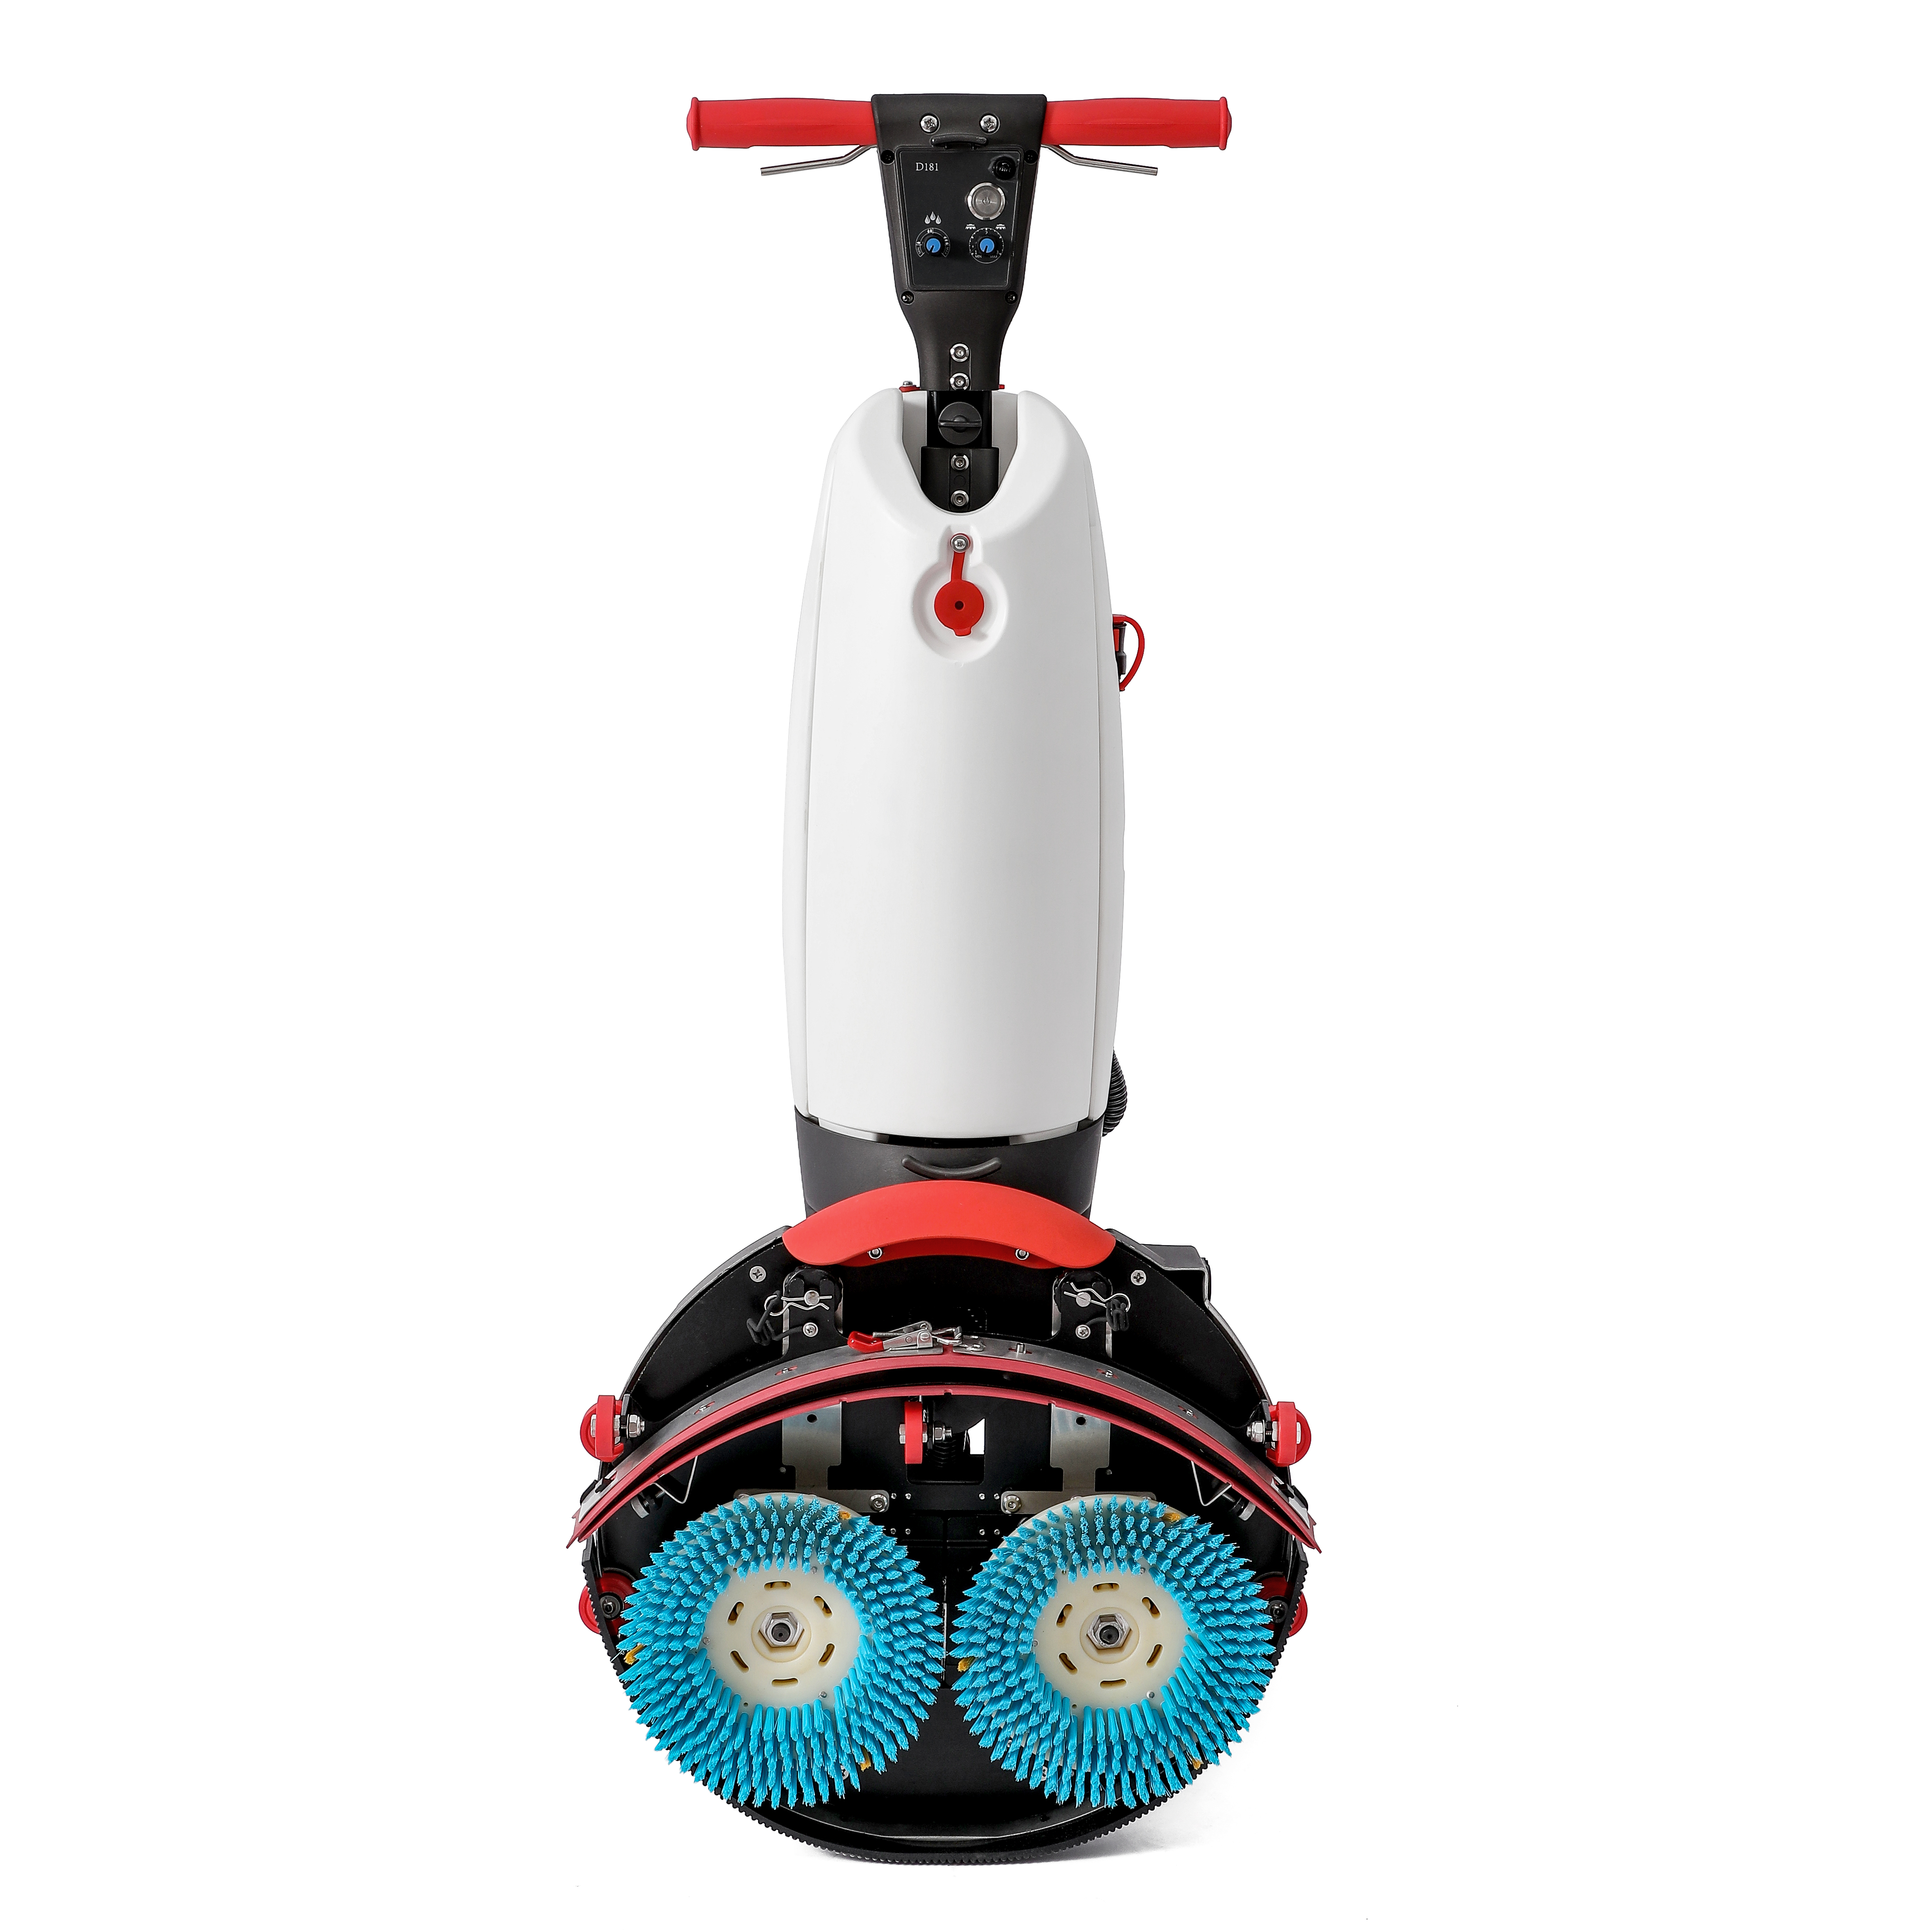 Product 130000002: AUTOSCRUBBER X-SCRUB PRO 17.5"  CLEANING PATH DUAL COUNTER 